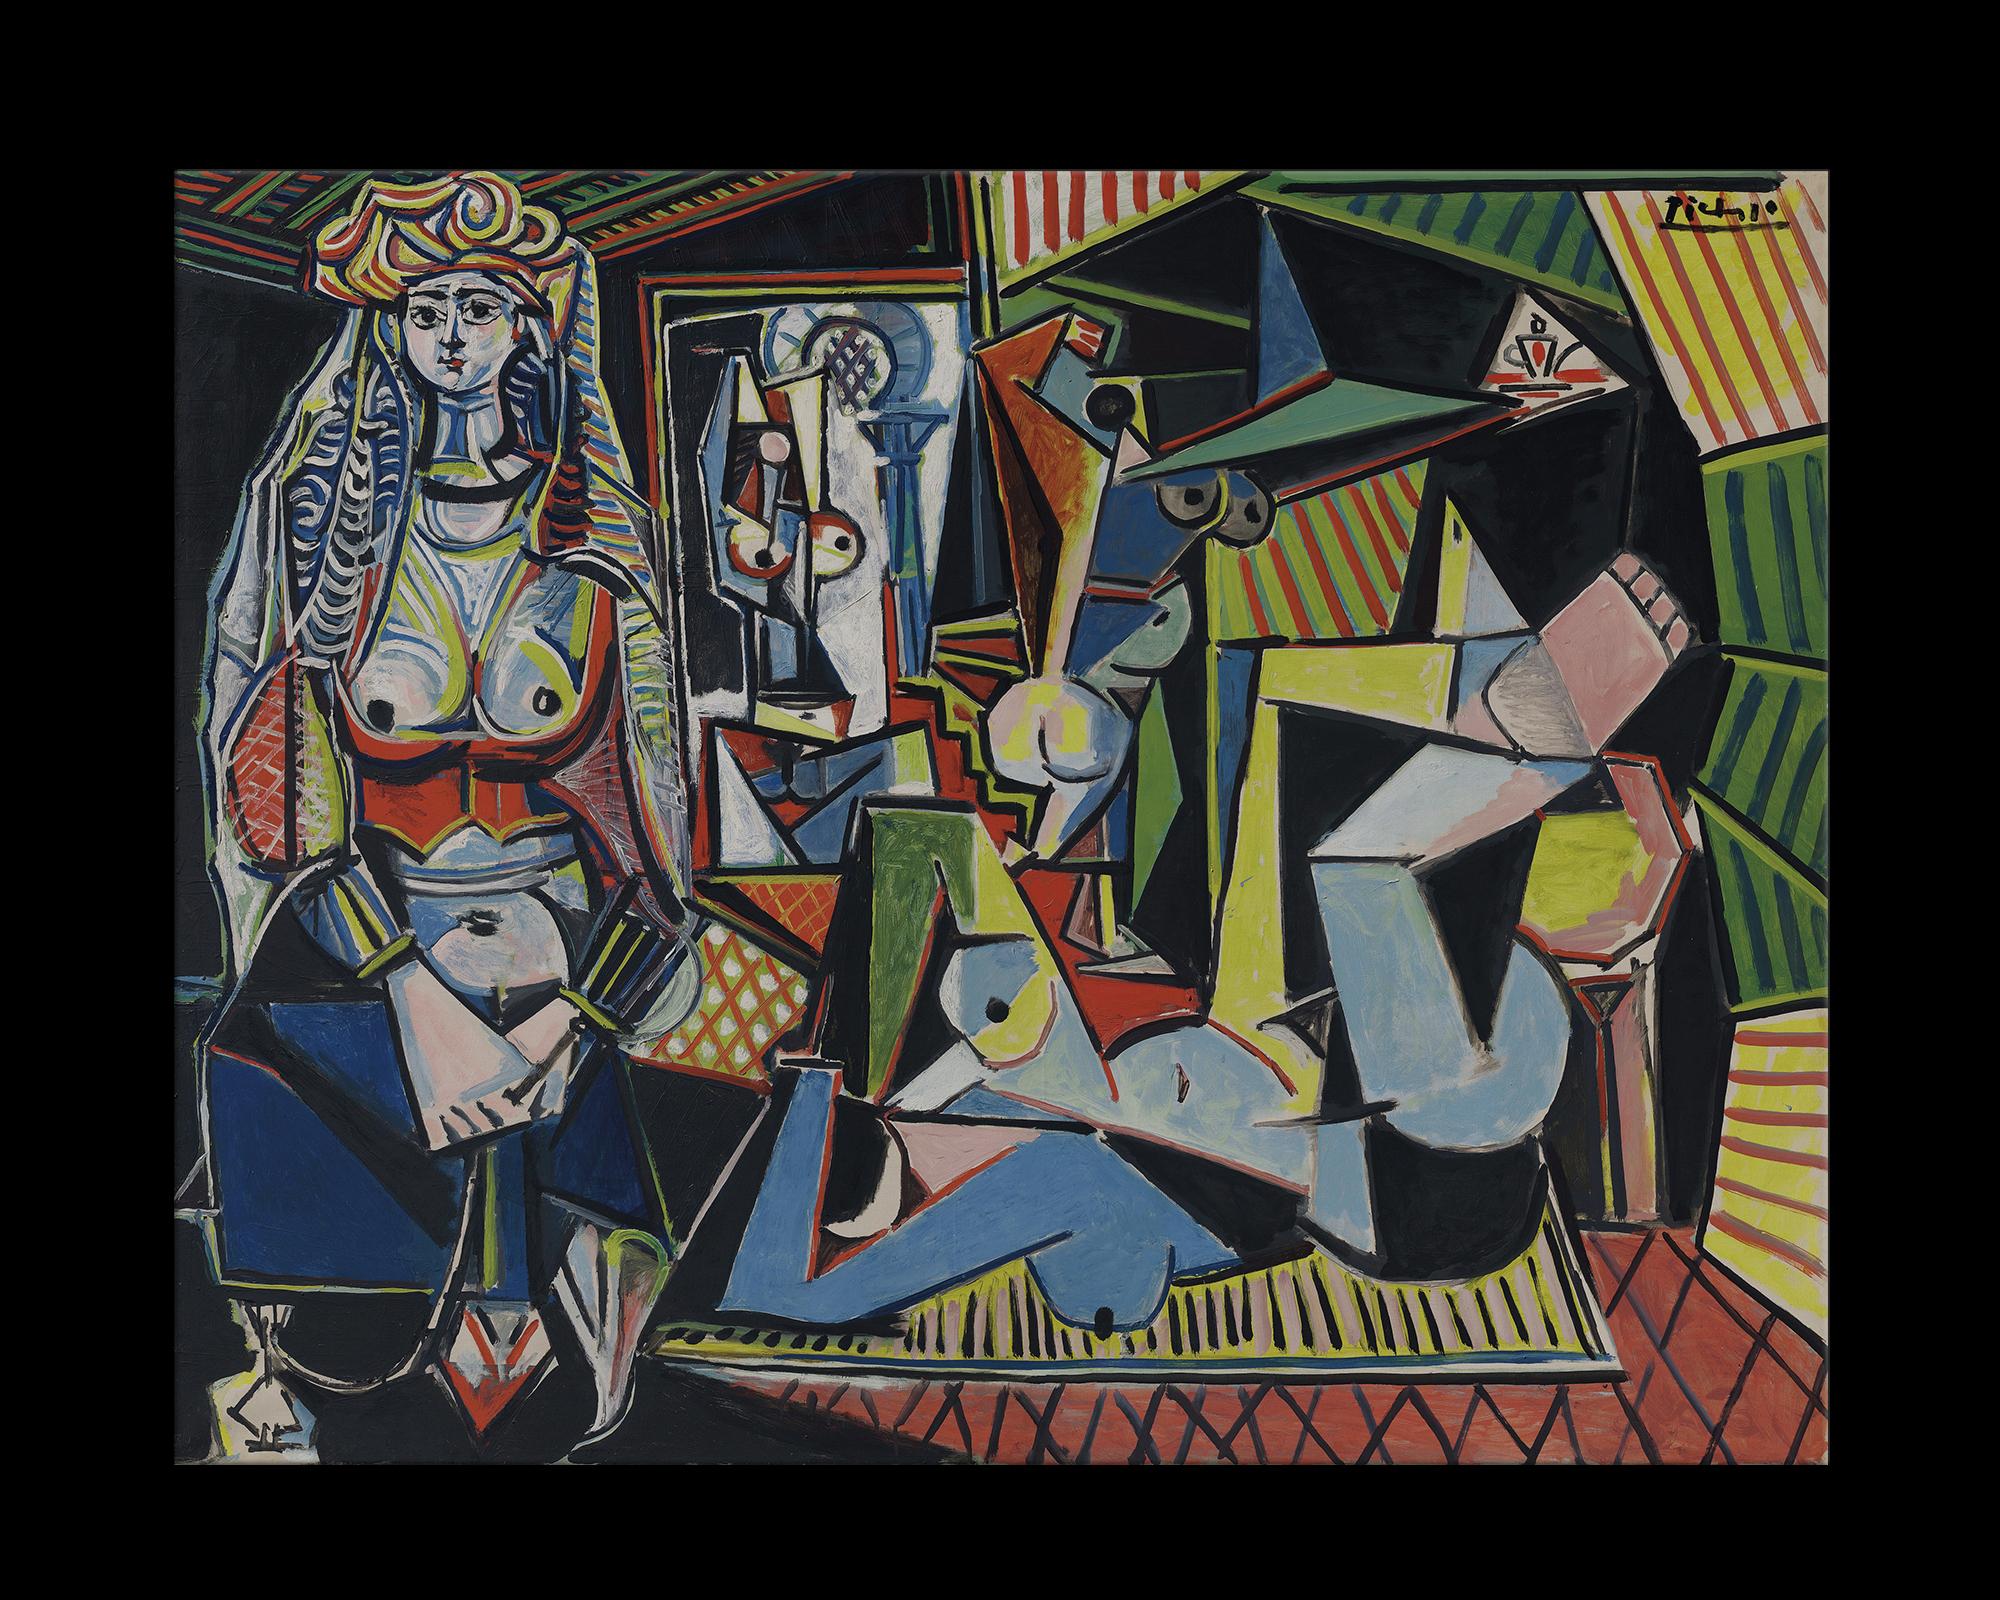 This large Expressionist Masterpiece is a faithful yet nuanced reproduction of the 